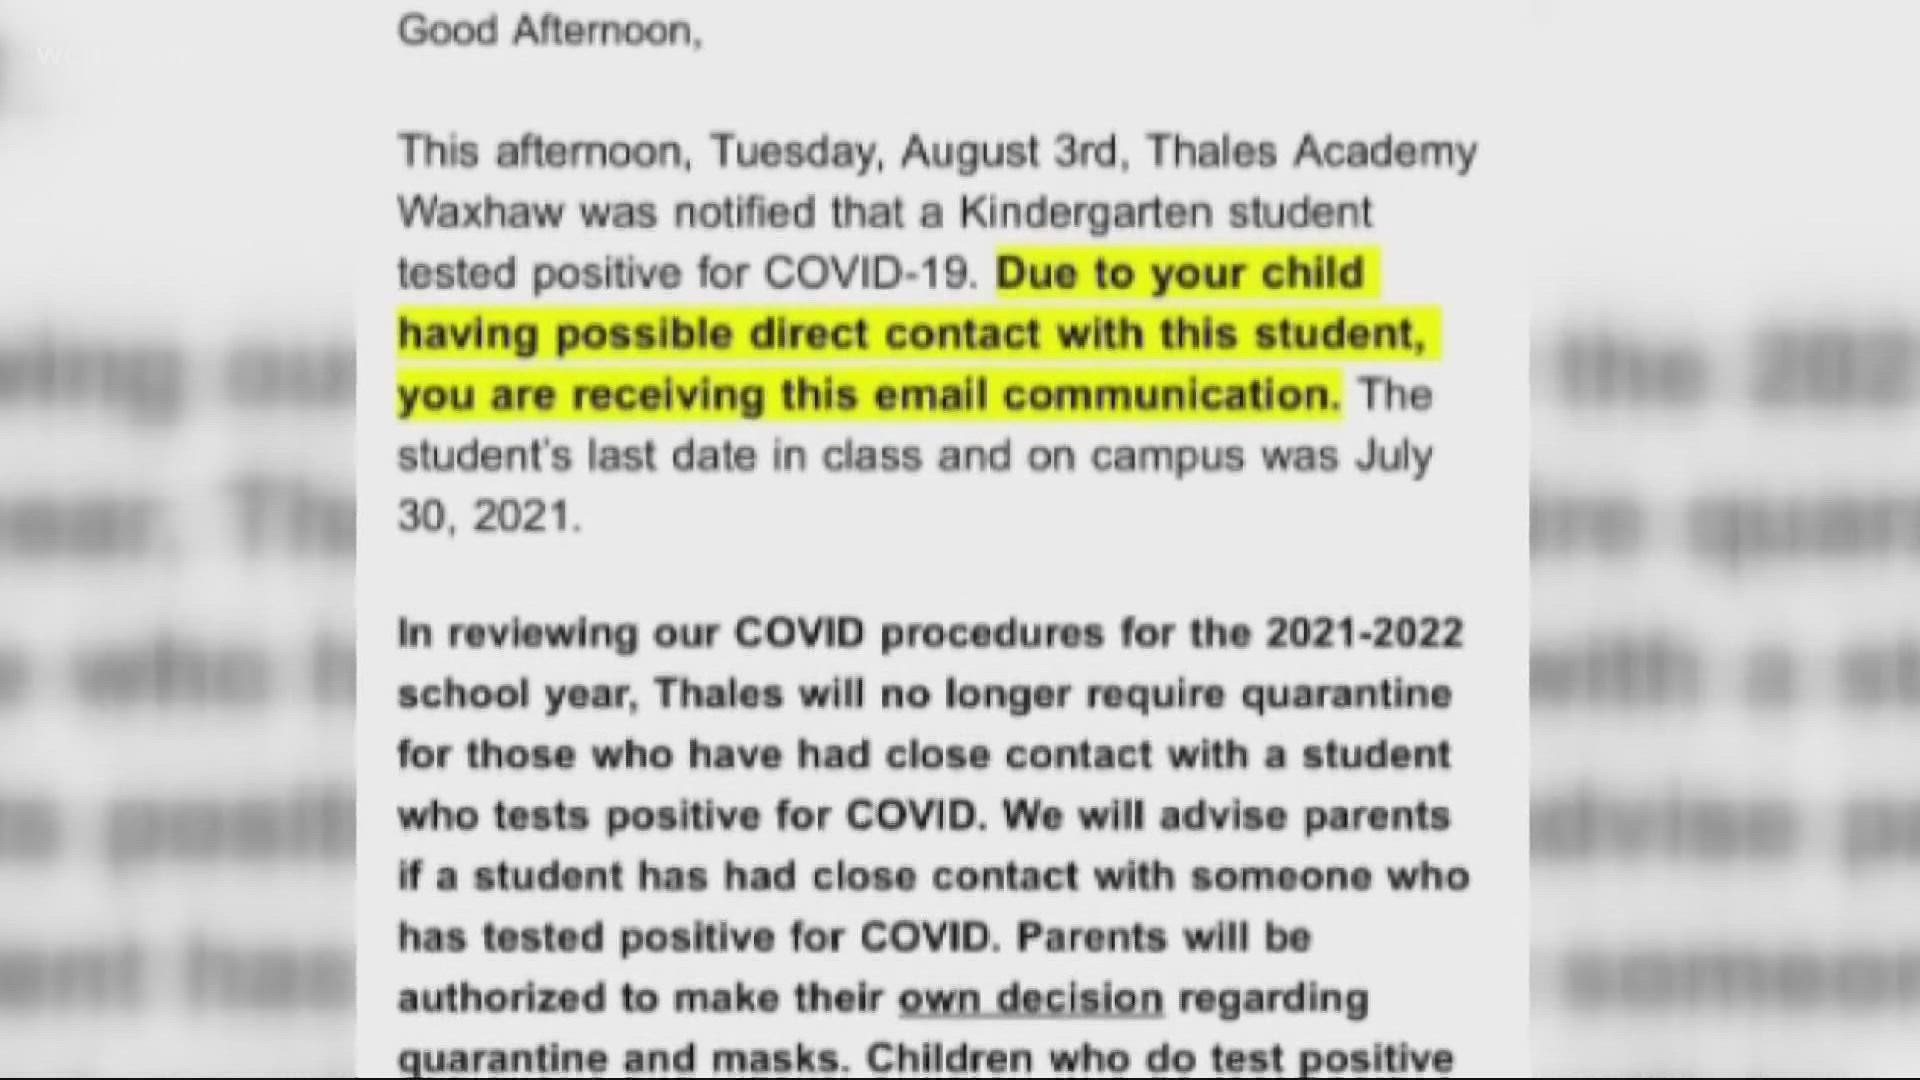 Ashley Daley digs into parents' concerns after learning of the policy only after a student tested positive for COVID-19.